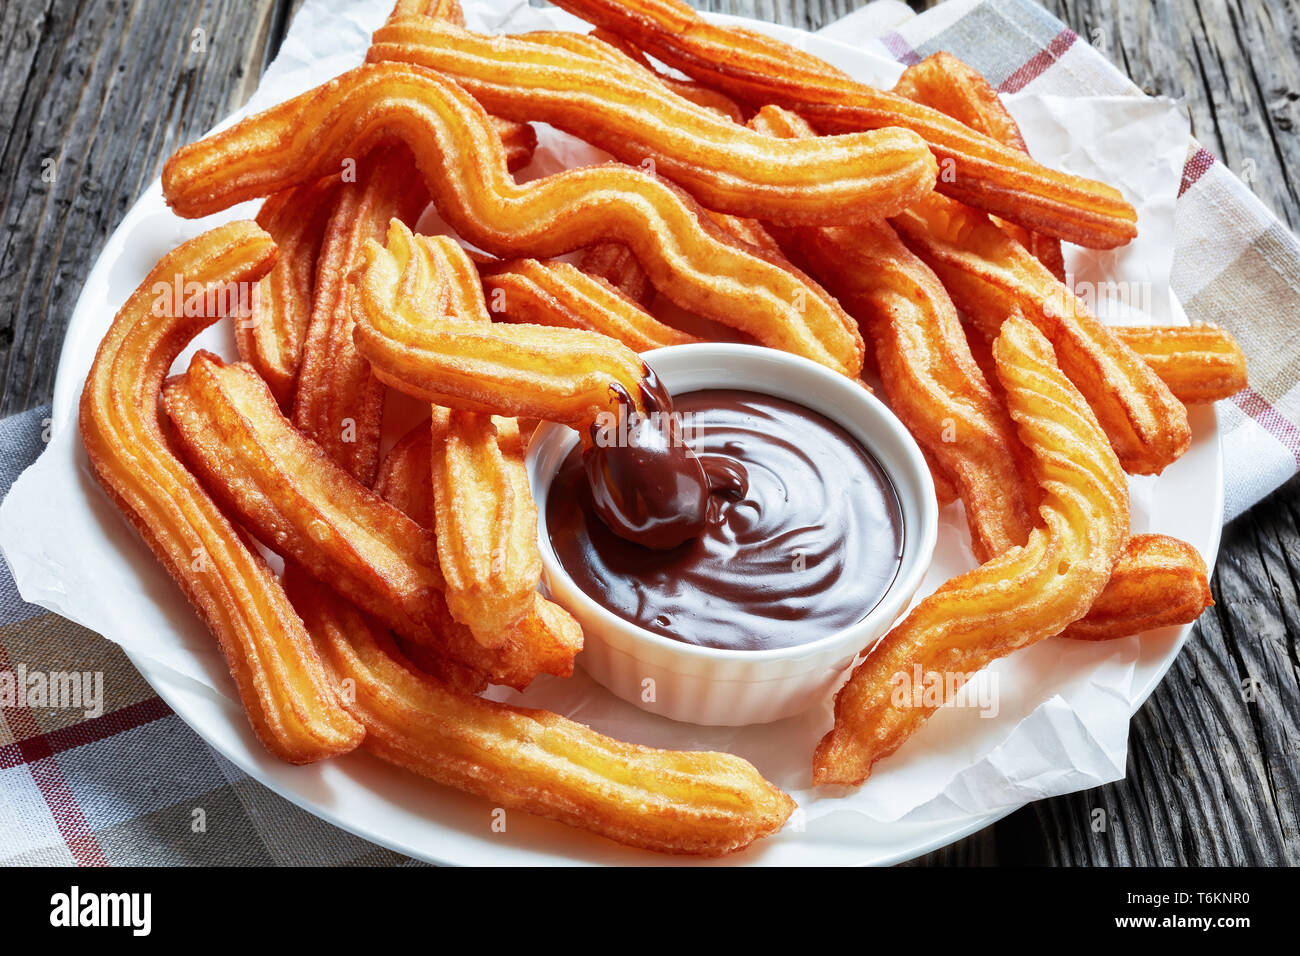 delicious deep fried churros served with chocolate dipping on a white plate on a wooden table with napkin, Traditional spanish and mexican street food Stock Photo